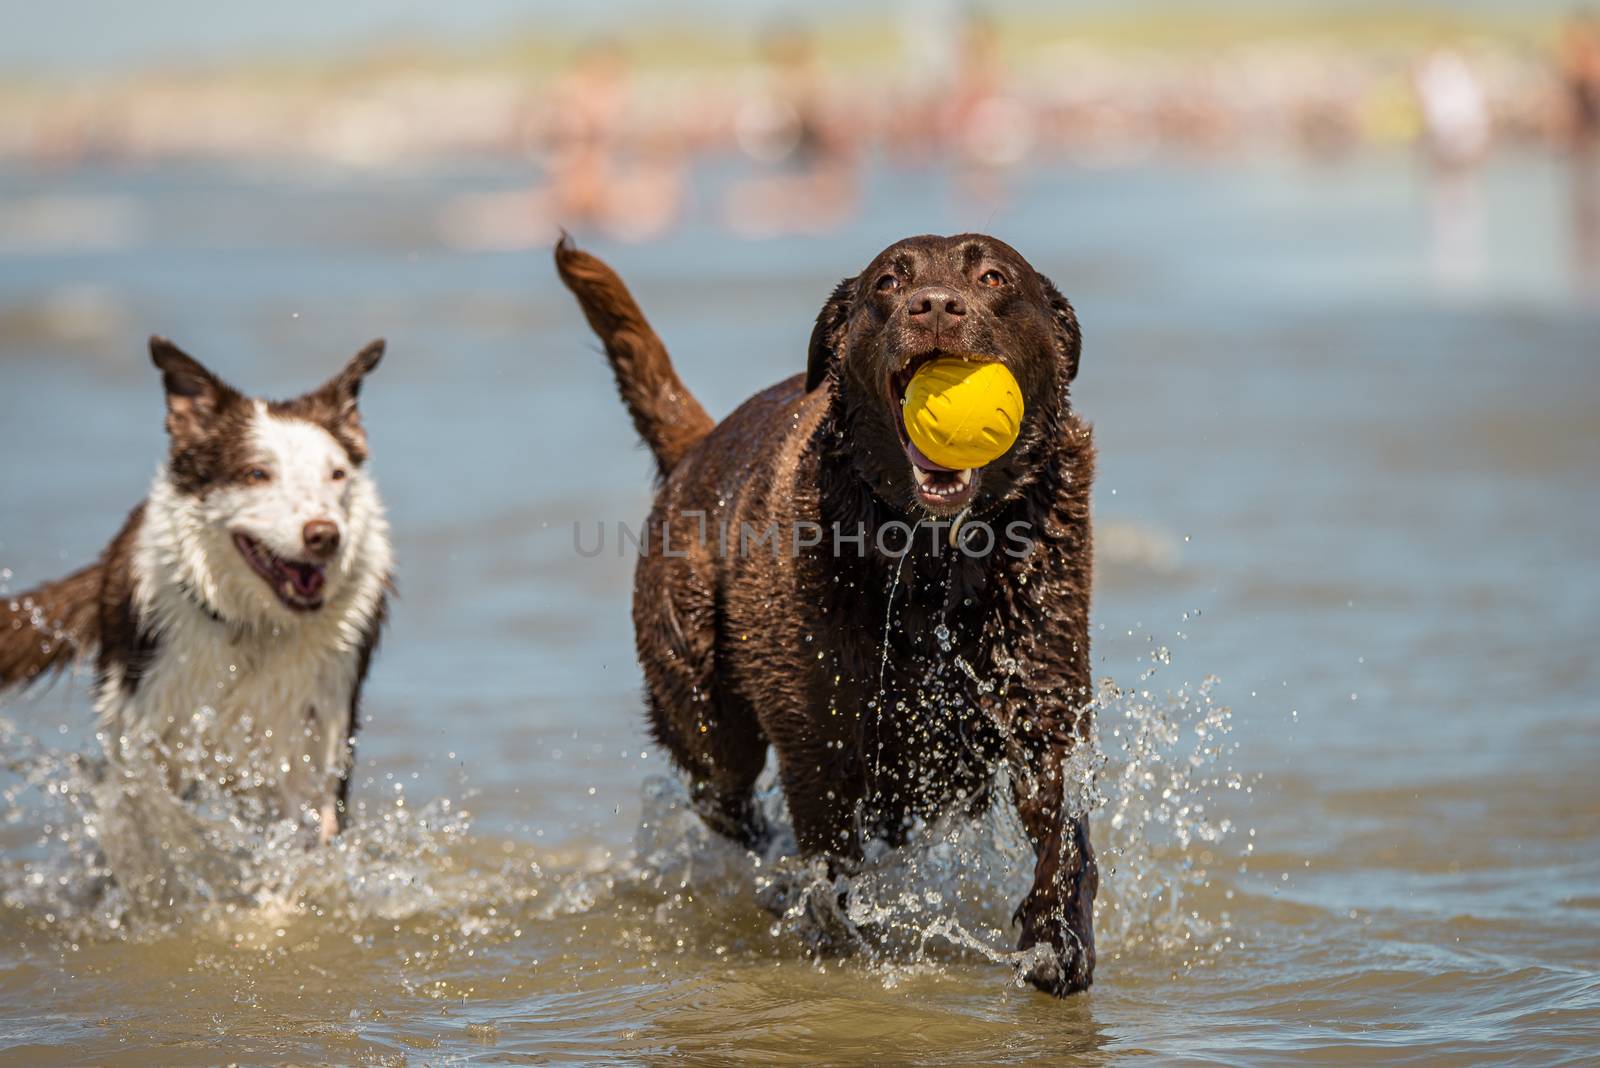 Border collie and chocolate labrador running in the ocean surf by Pendleton